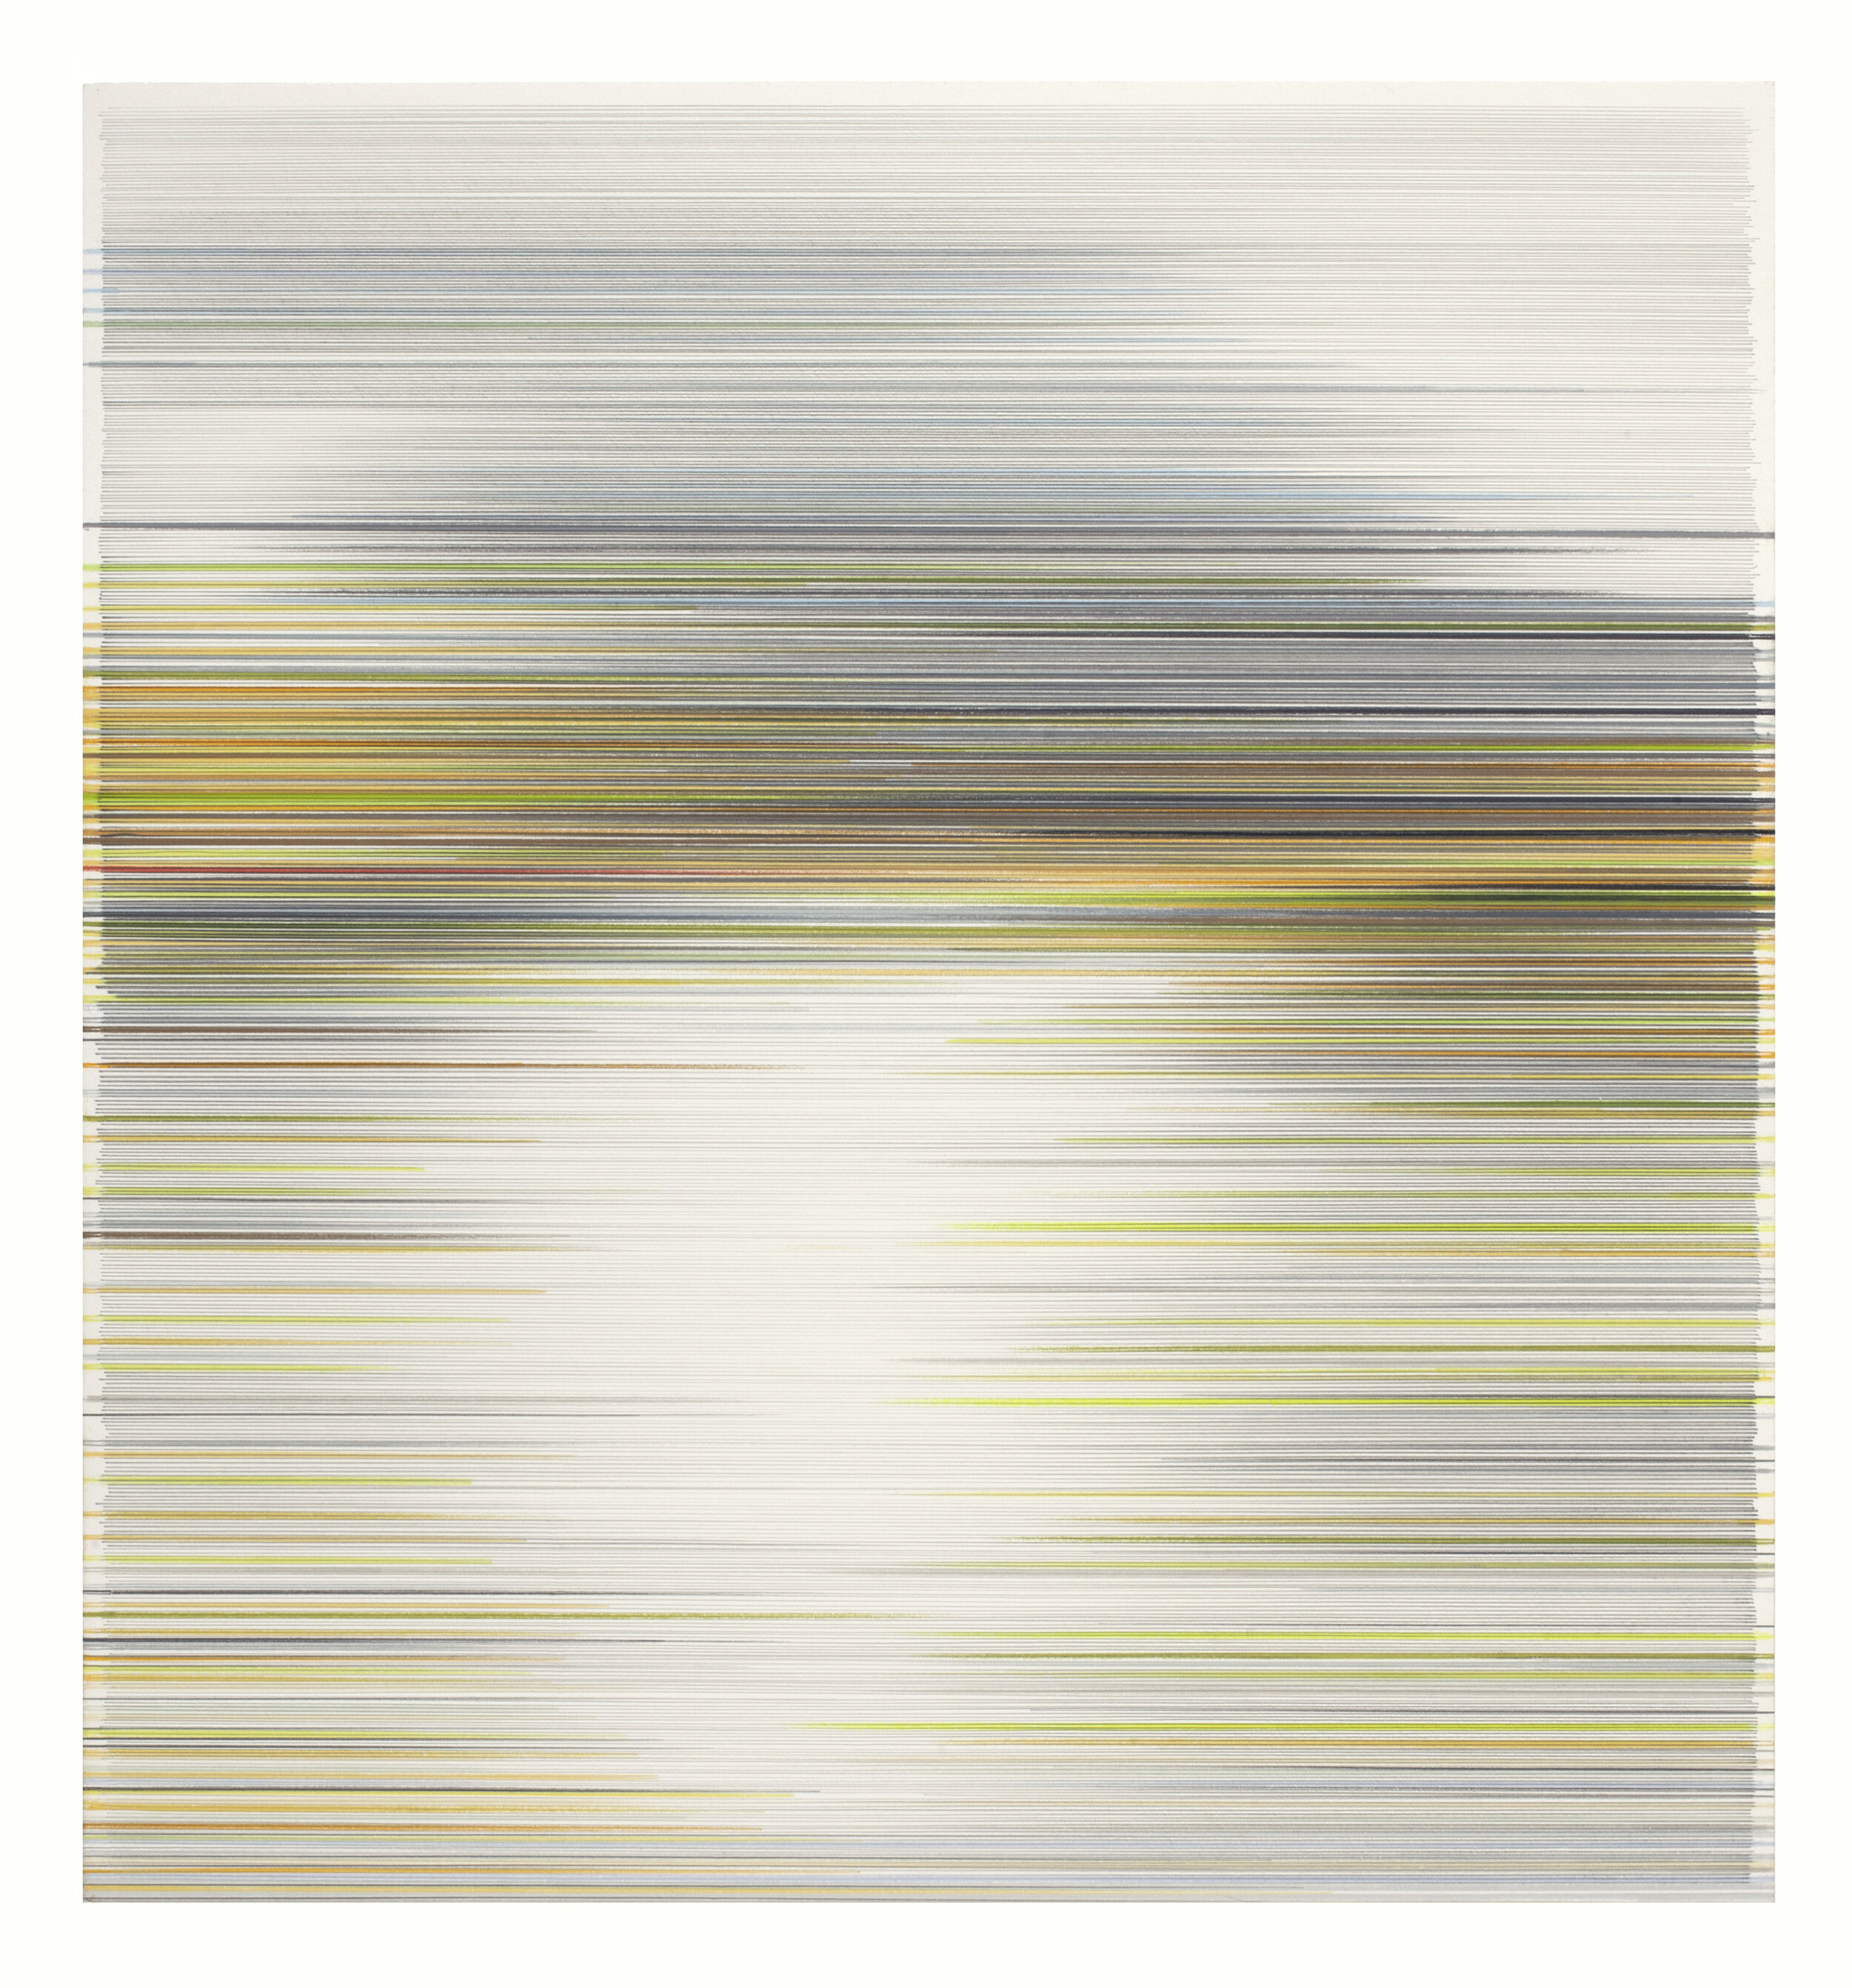    flash: blur   2021 graphite and colored pencil on mat board 26 by 24 inches included in   Everyday   at Haw Contemporary June 18 - August 6, 2021 